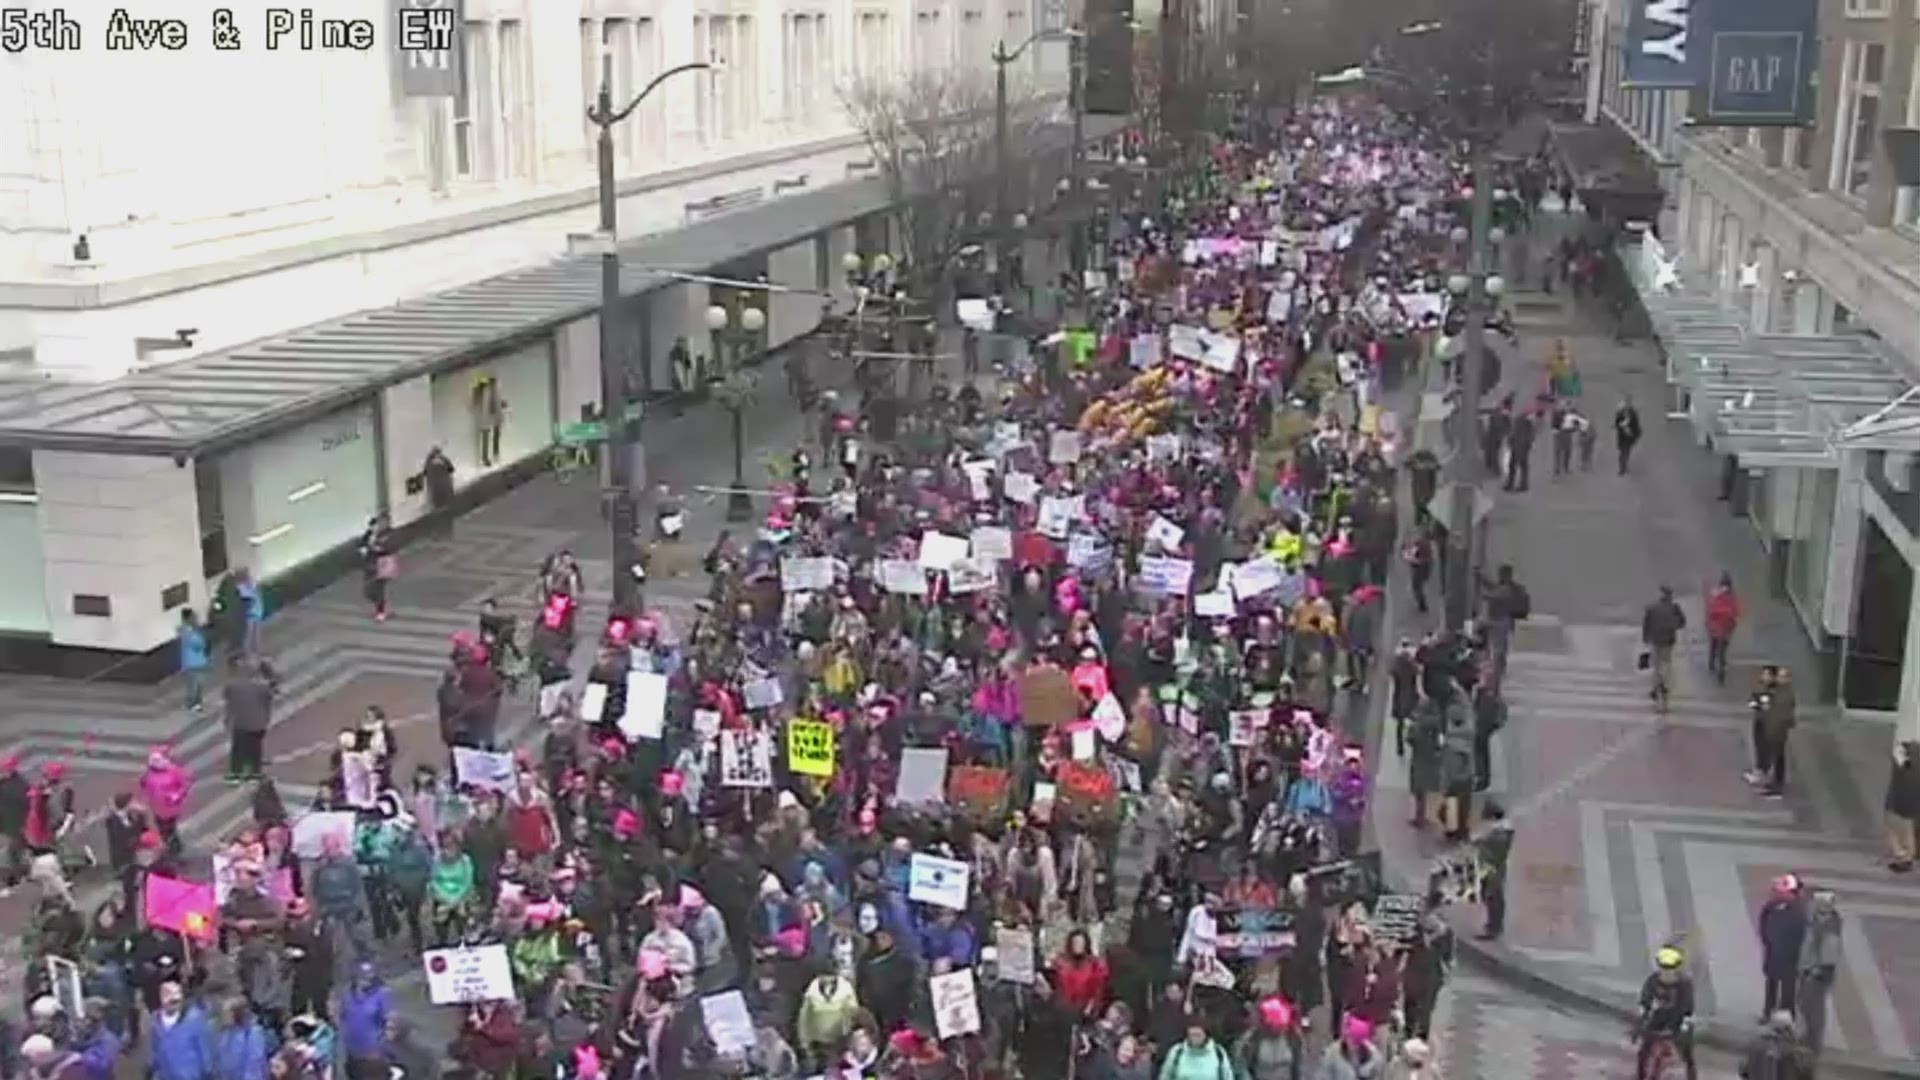 Take in a birds-eye view of the Womxn’s March as it winds downtown Seattle on January 19, 2019.